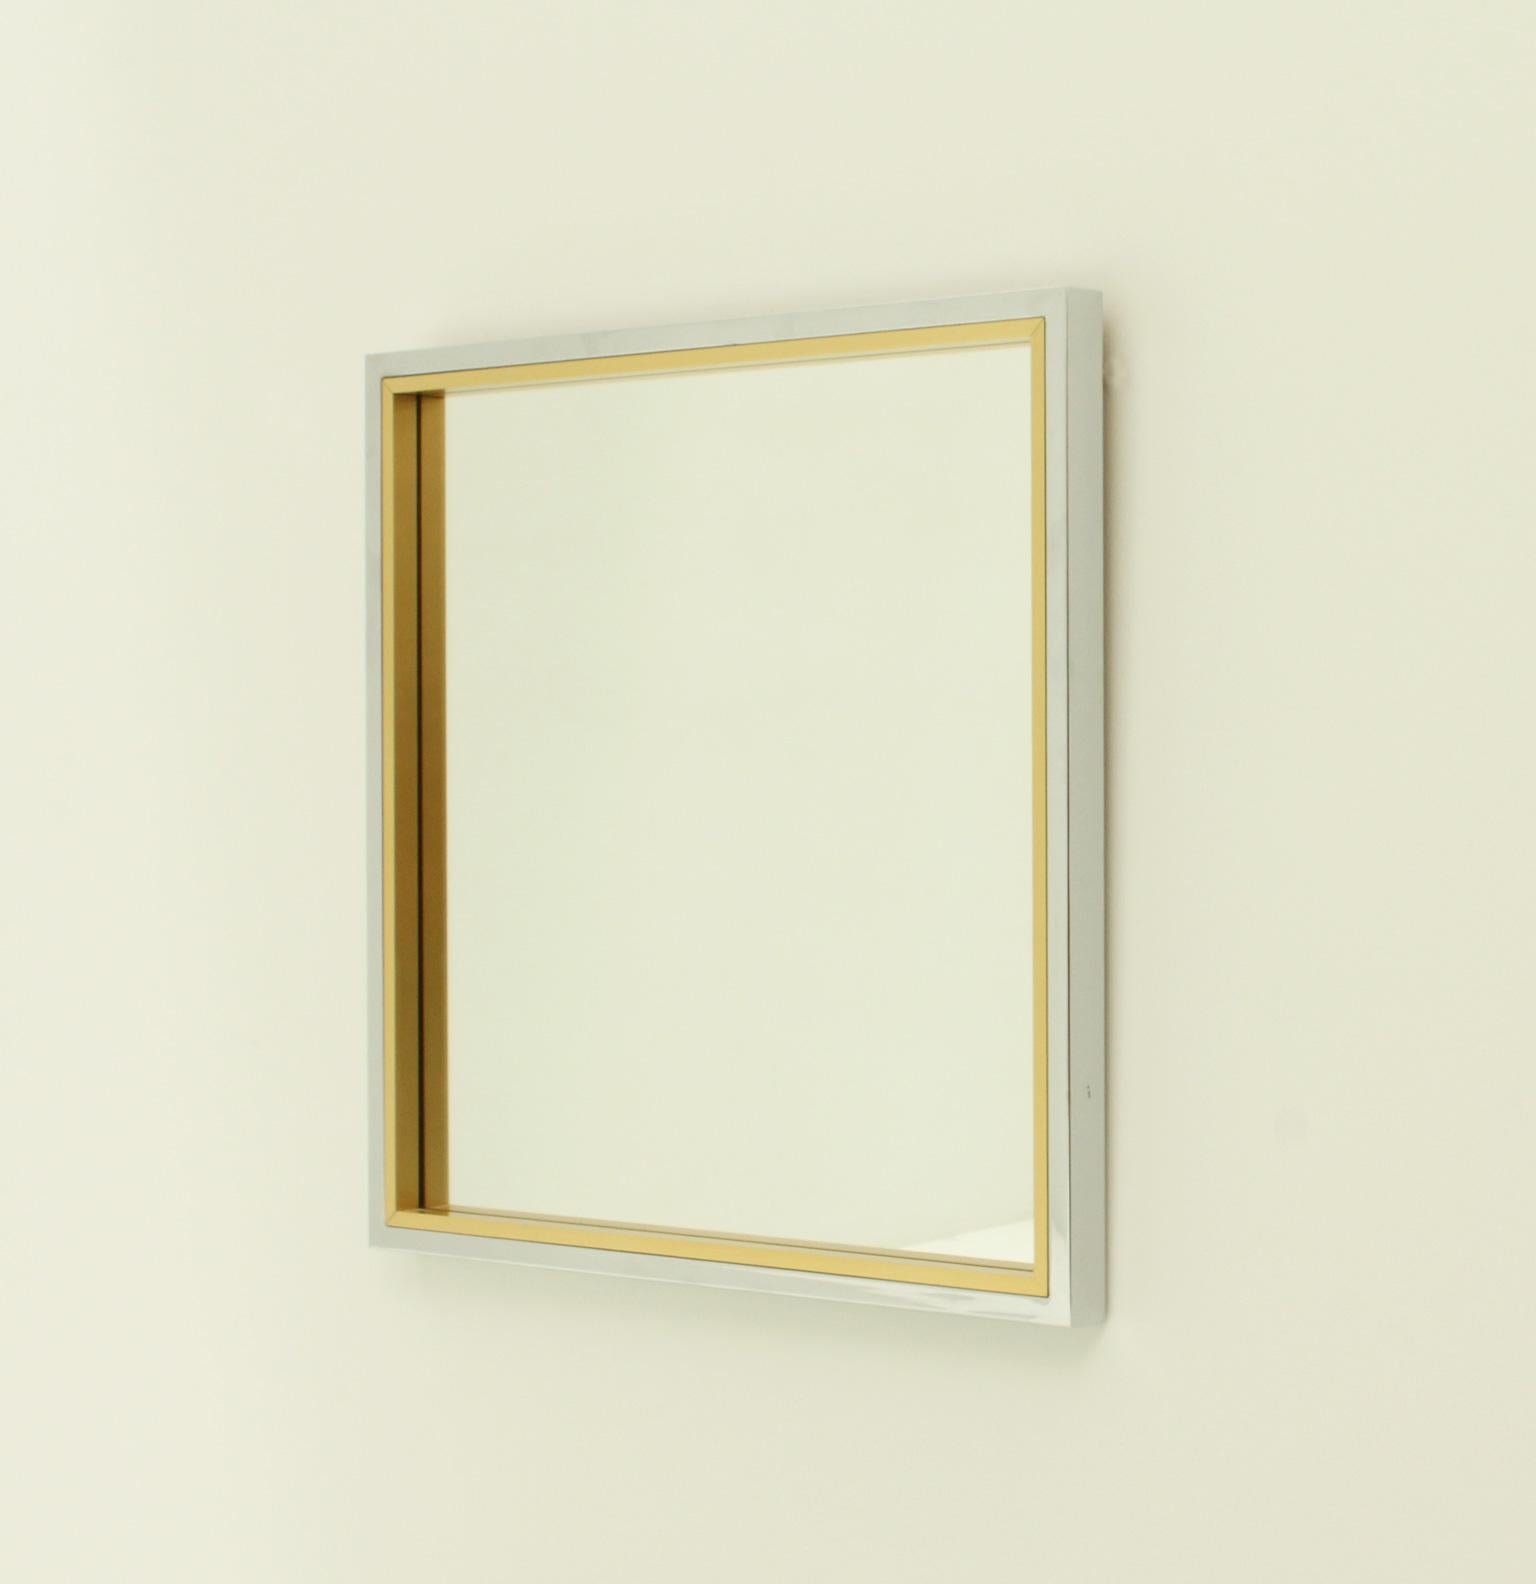 Italian Square Wall Mirror in Brass and Chrome from 1970's For Sale 2